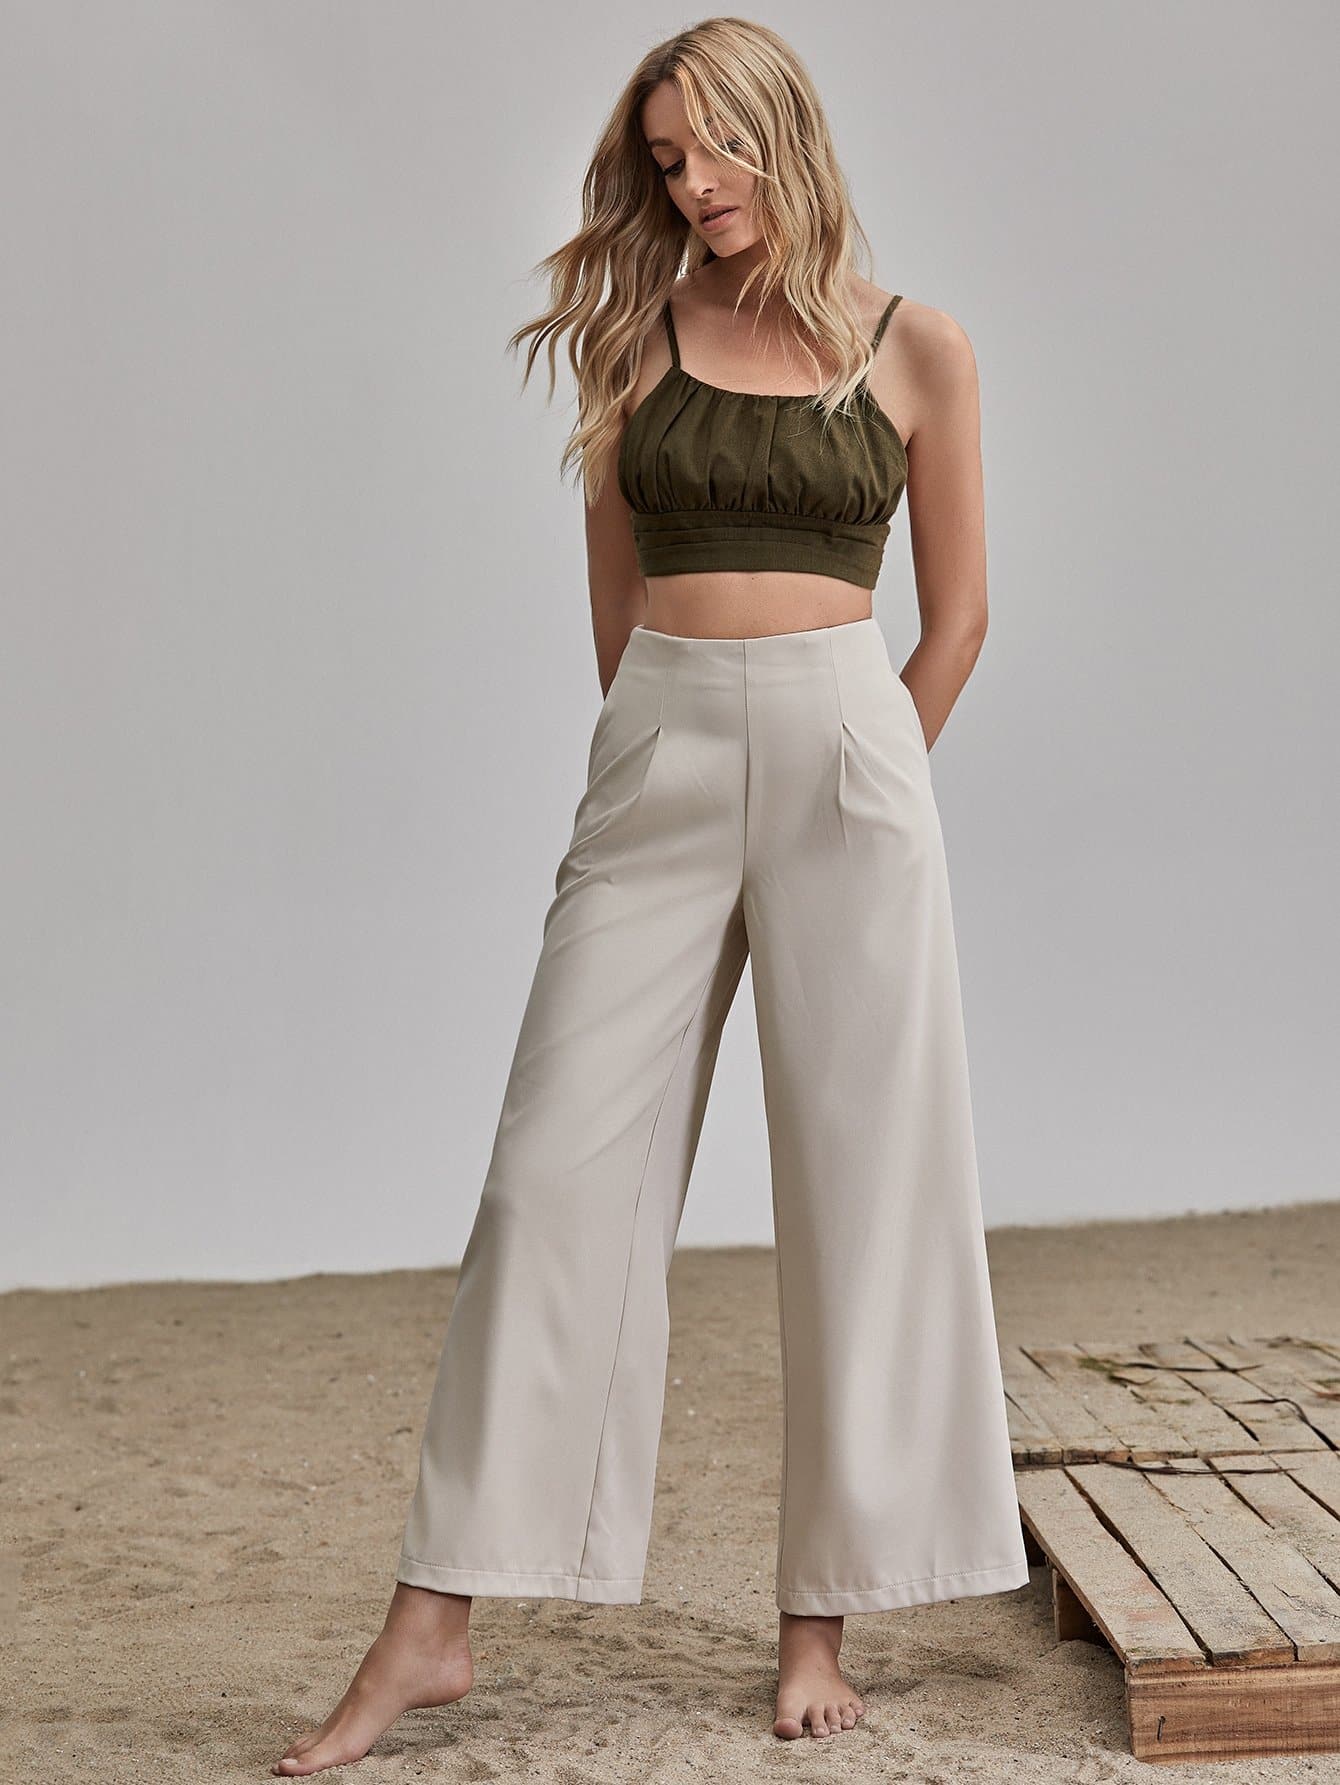 Army Green Backless Sleeveless Ruched Bust Crisscross Back Crop Top